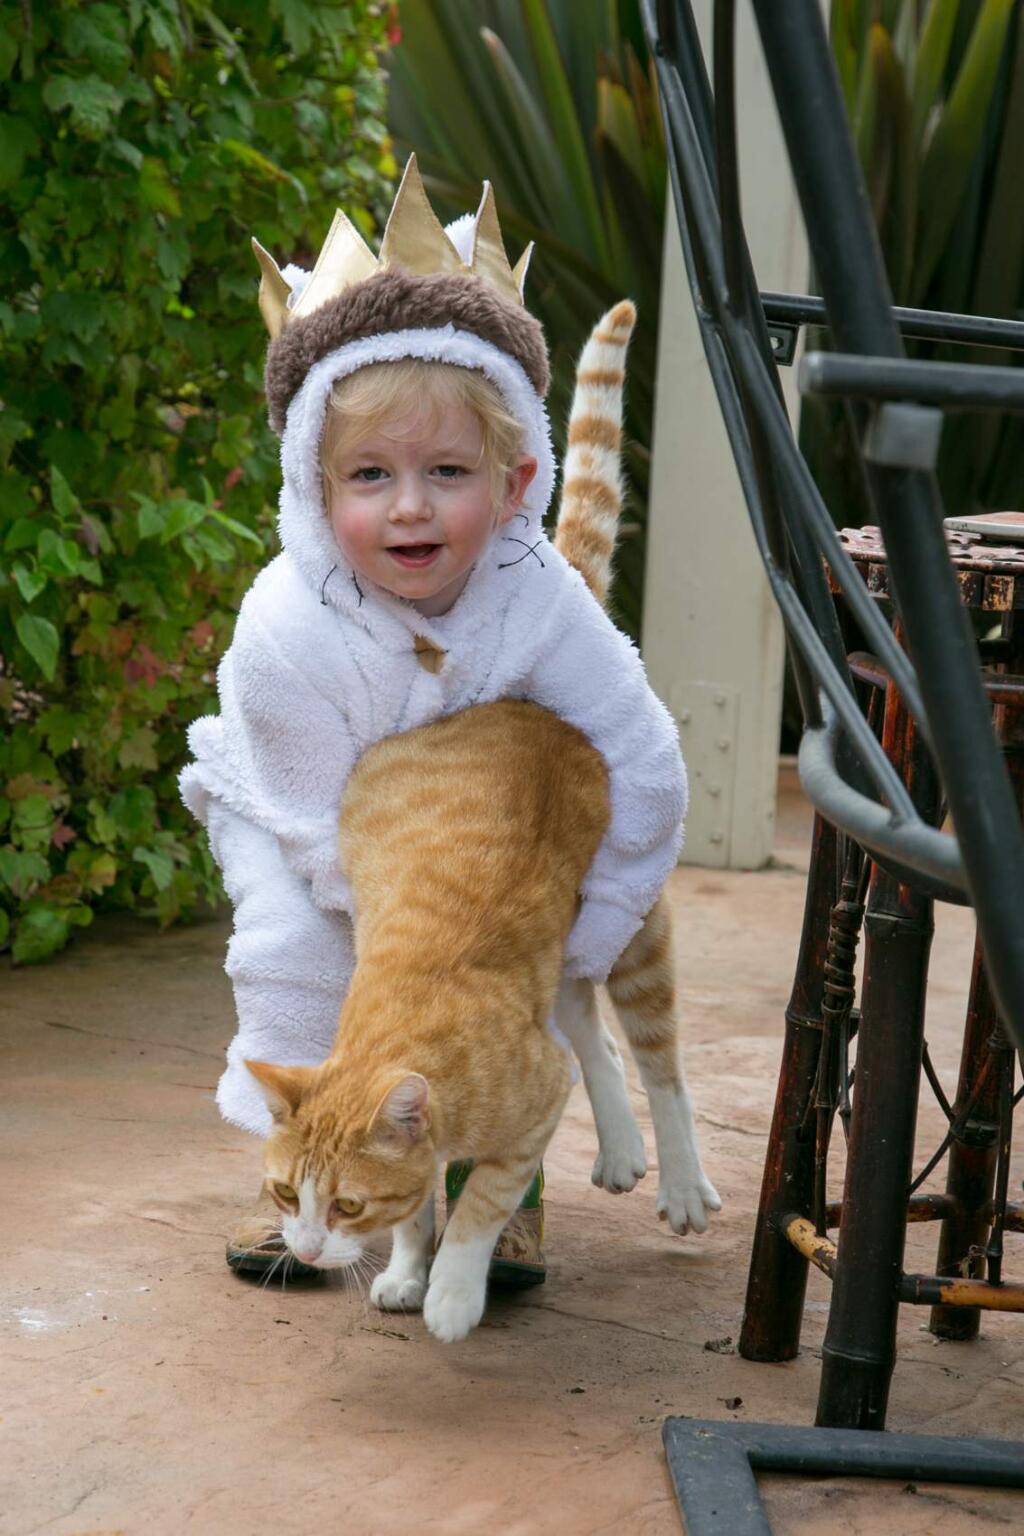 Jack Yankee in his Halloween costume as Max from 'Where the Wild Things Are' at home in Sonoma Thursday, Oct. 27, 2016. (Photo by Julie Vader/special to the Index-Tribune)